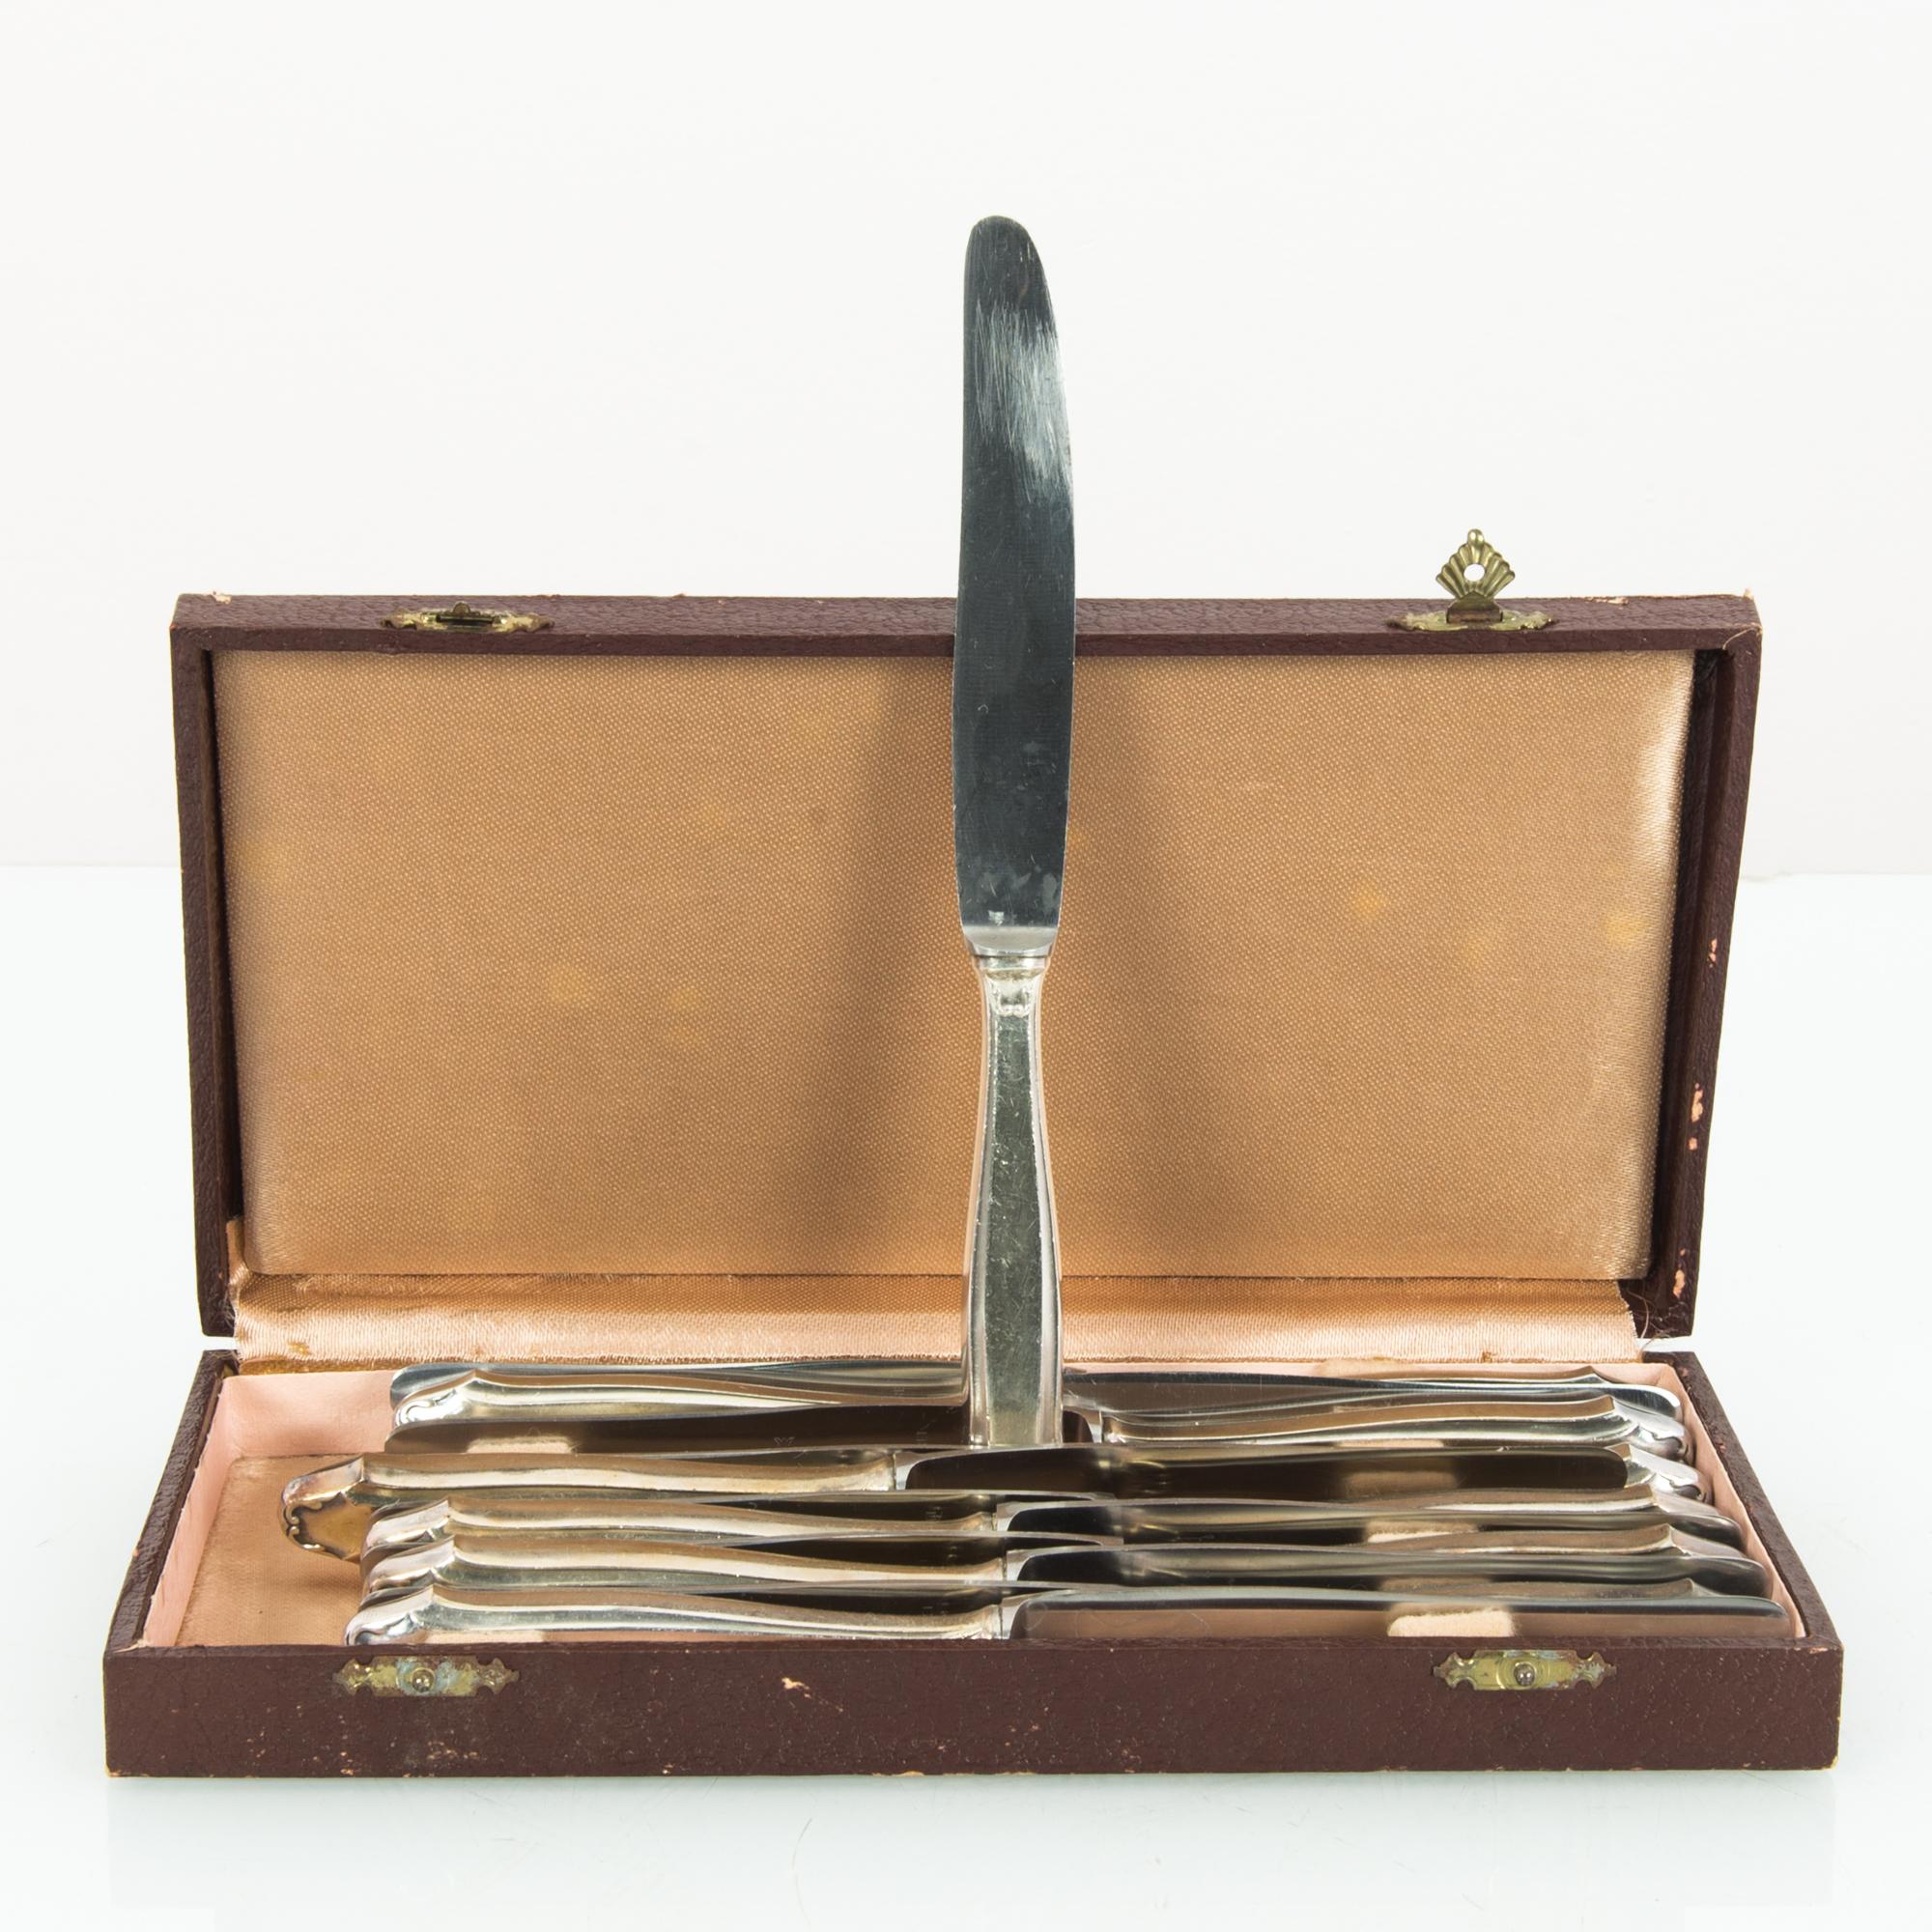 A set of silver-plated knives from Europe, circa 1920. Silver knives are poised within a rectangular box, which closes with a pair of gilded shell-shaped clasps. The exterior is finished in oxblood leather; the inside is lined with soft peach silk.